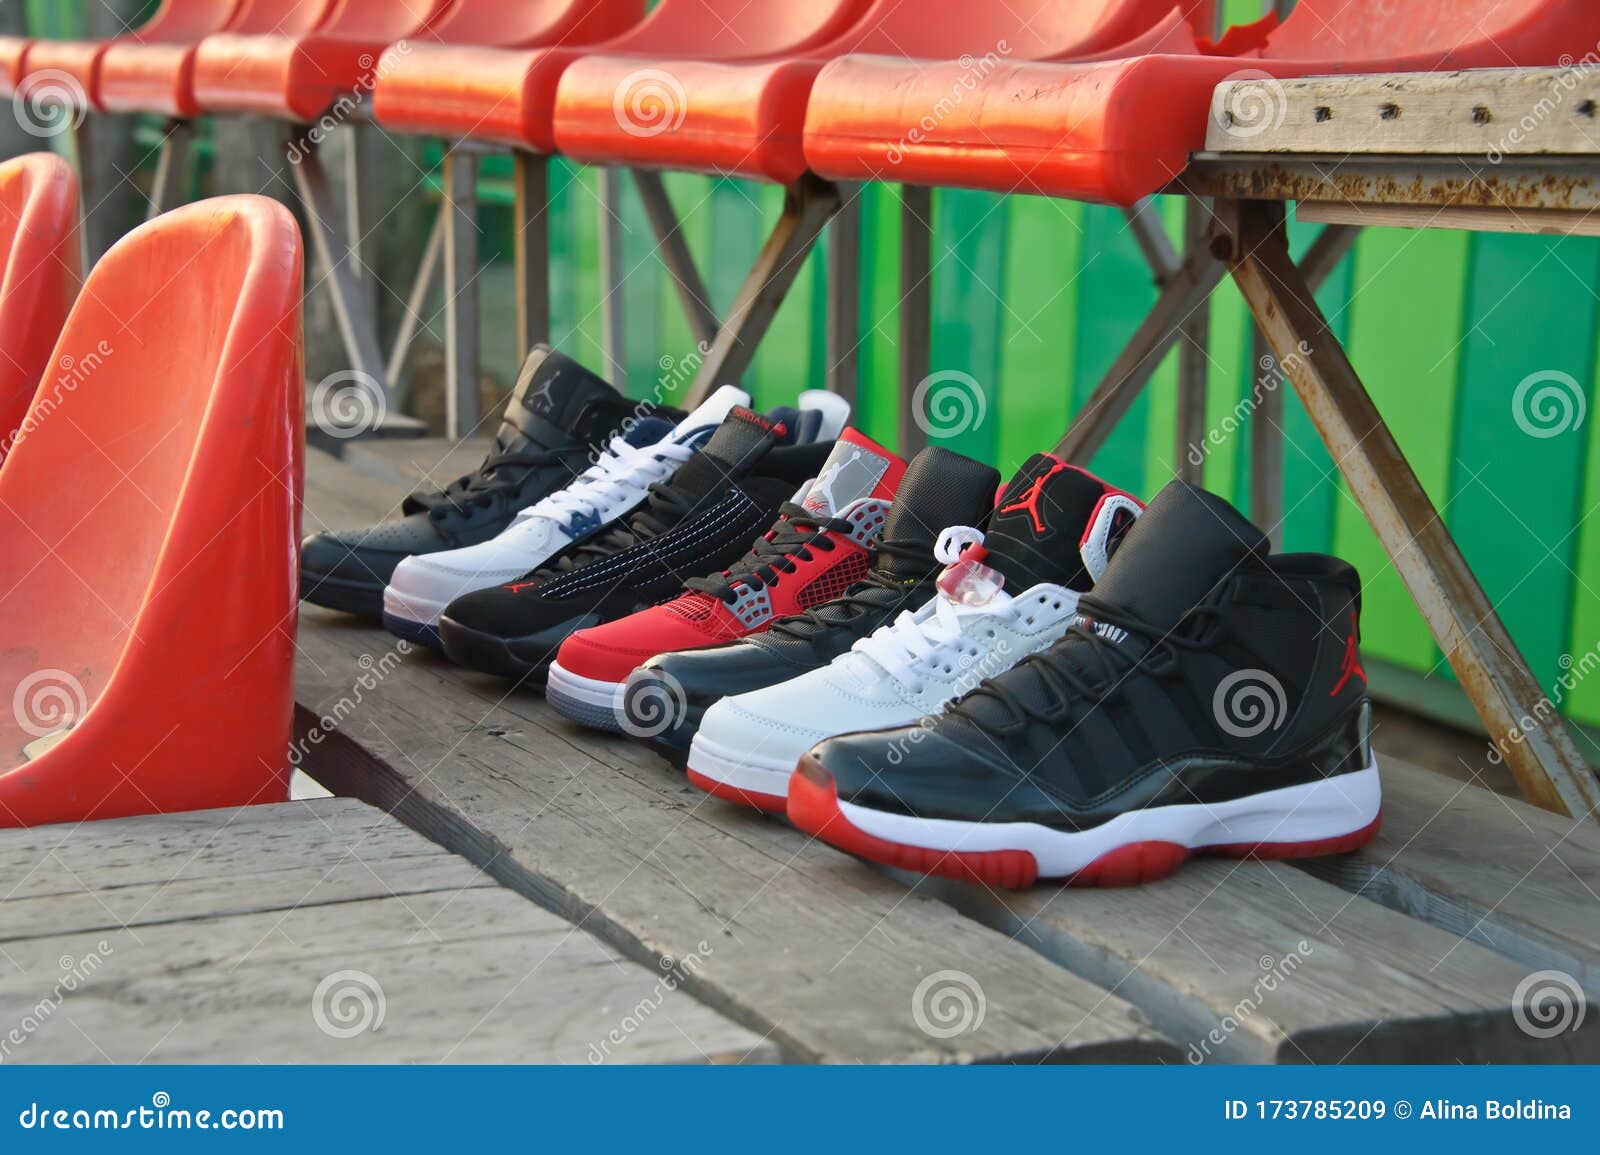 basketball shoes different colors